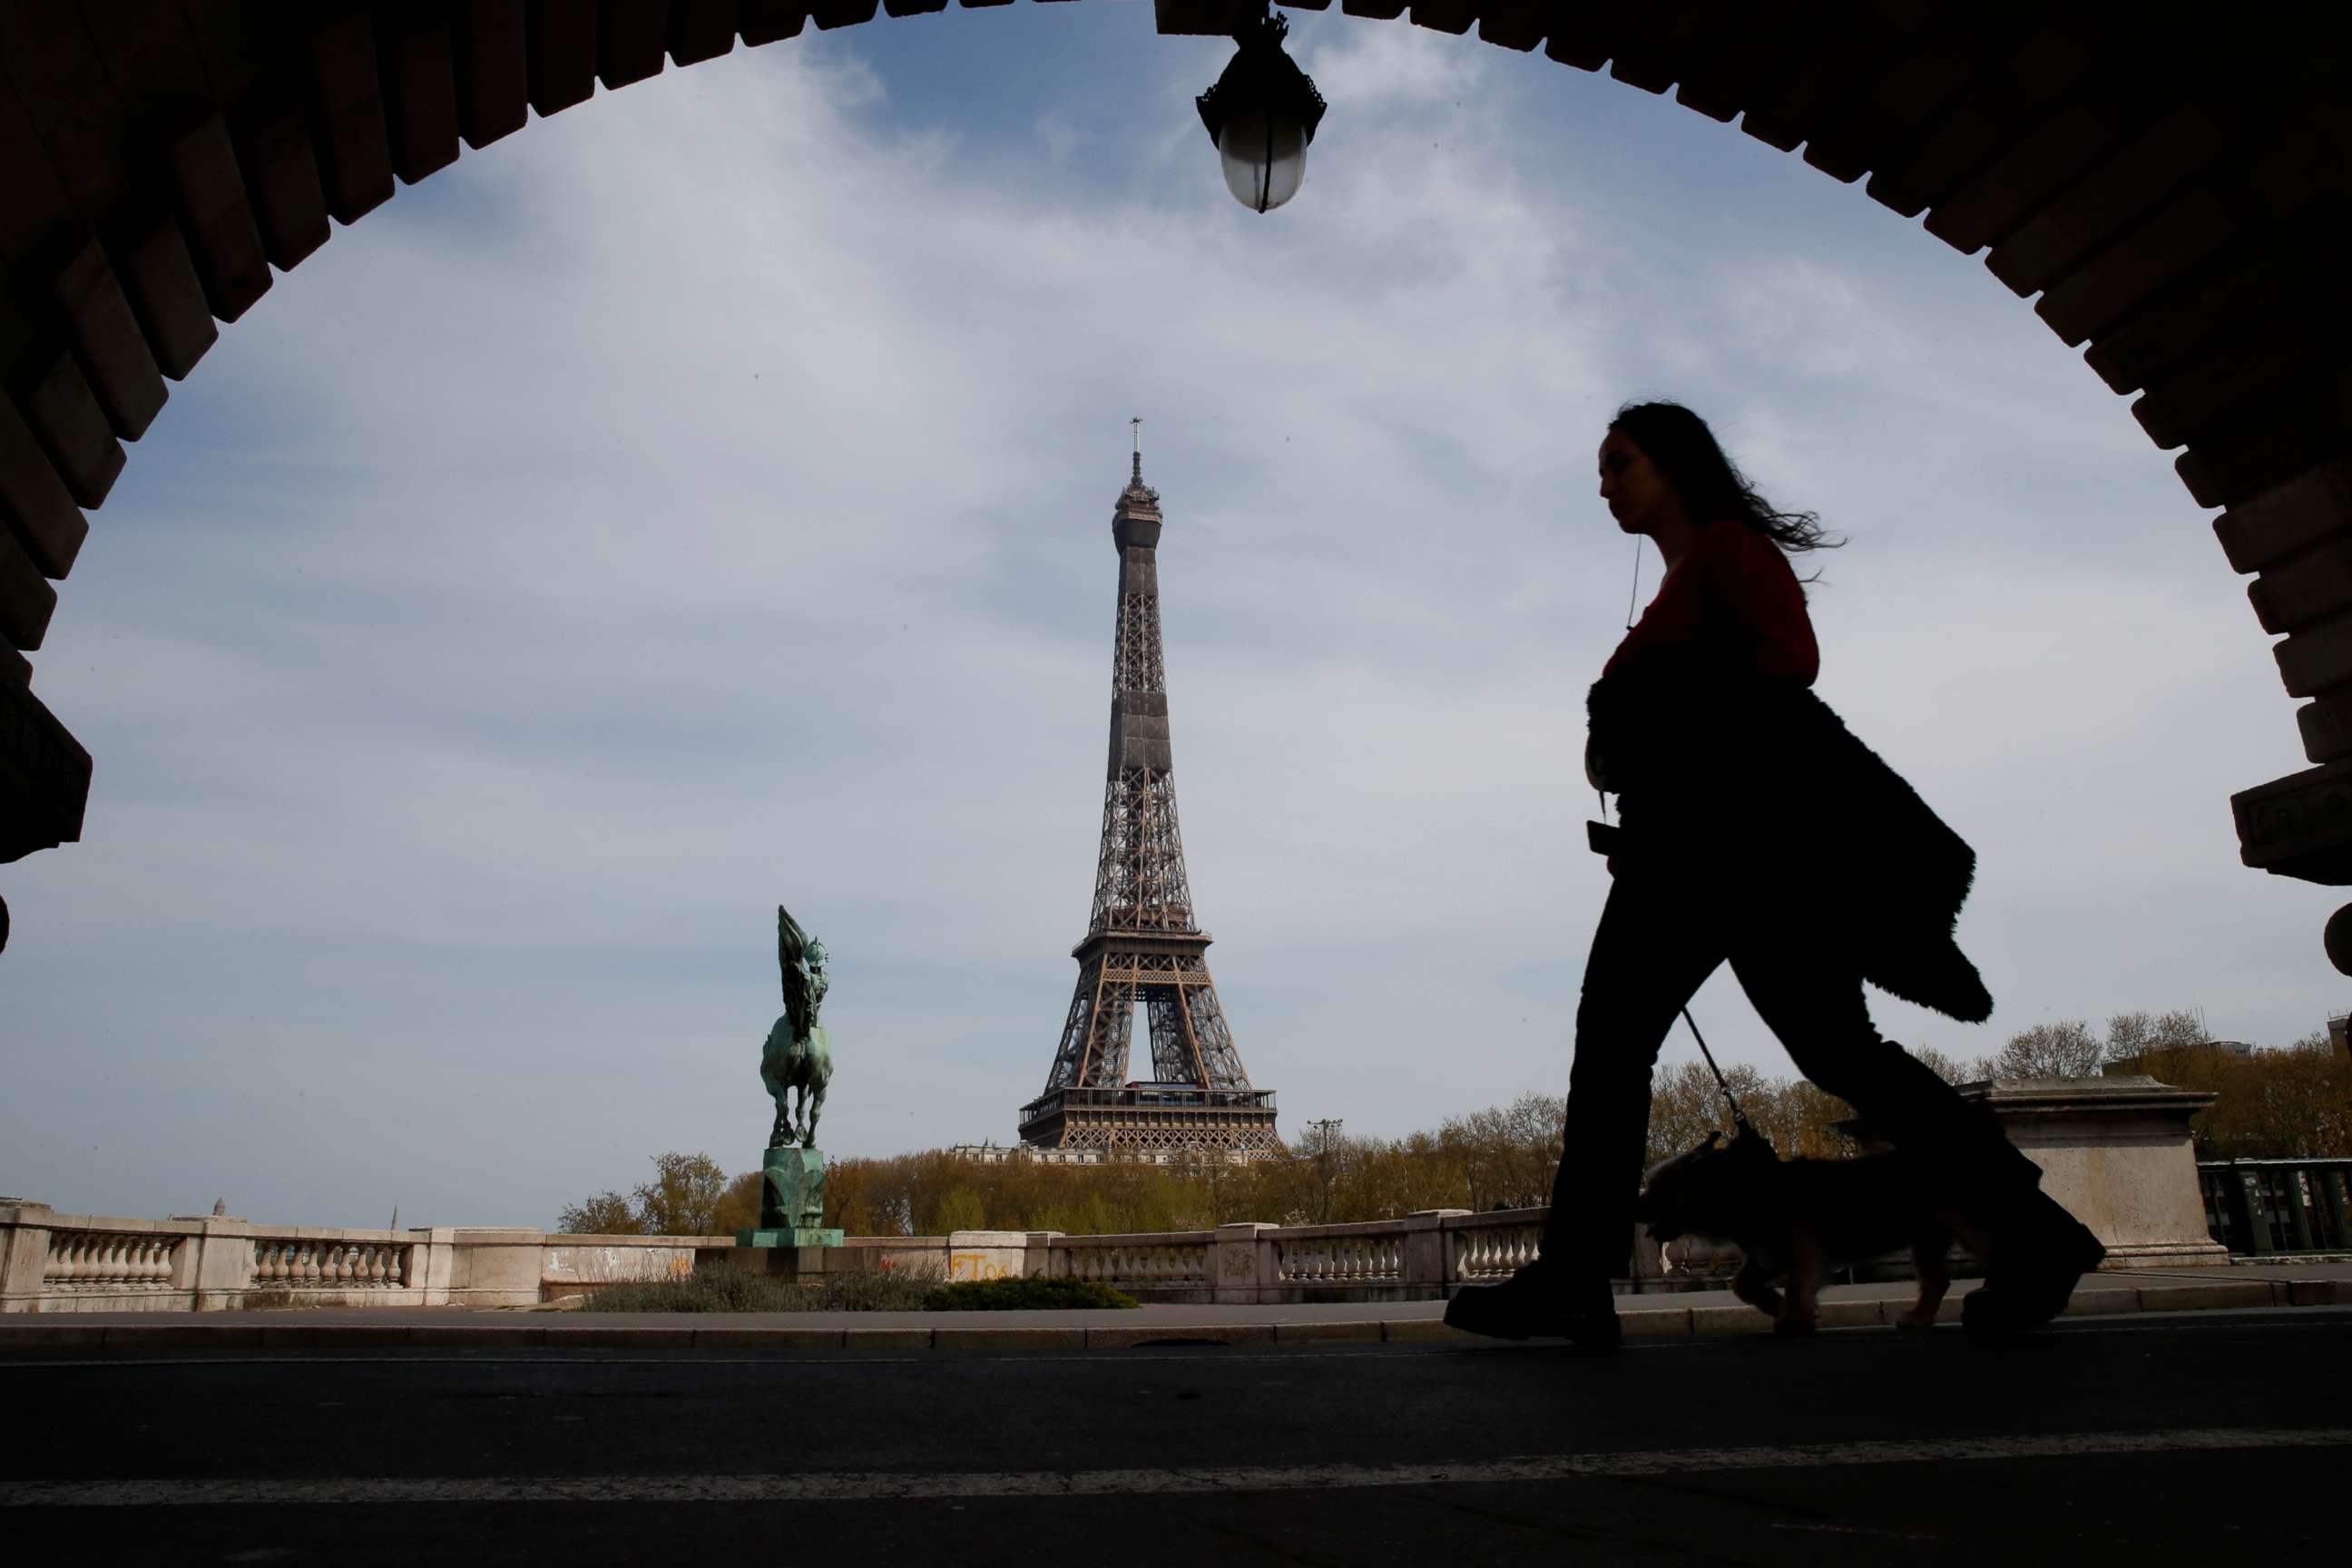 PHOTO: A woman walks her dog on a bridge with the Eiffel tower in the background in Paris, France, on April 7, 2020, during a nationwide confinement to counter the novel coronavirus.